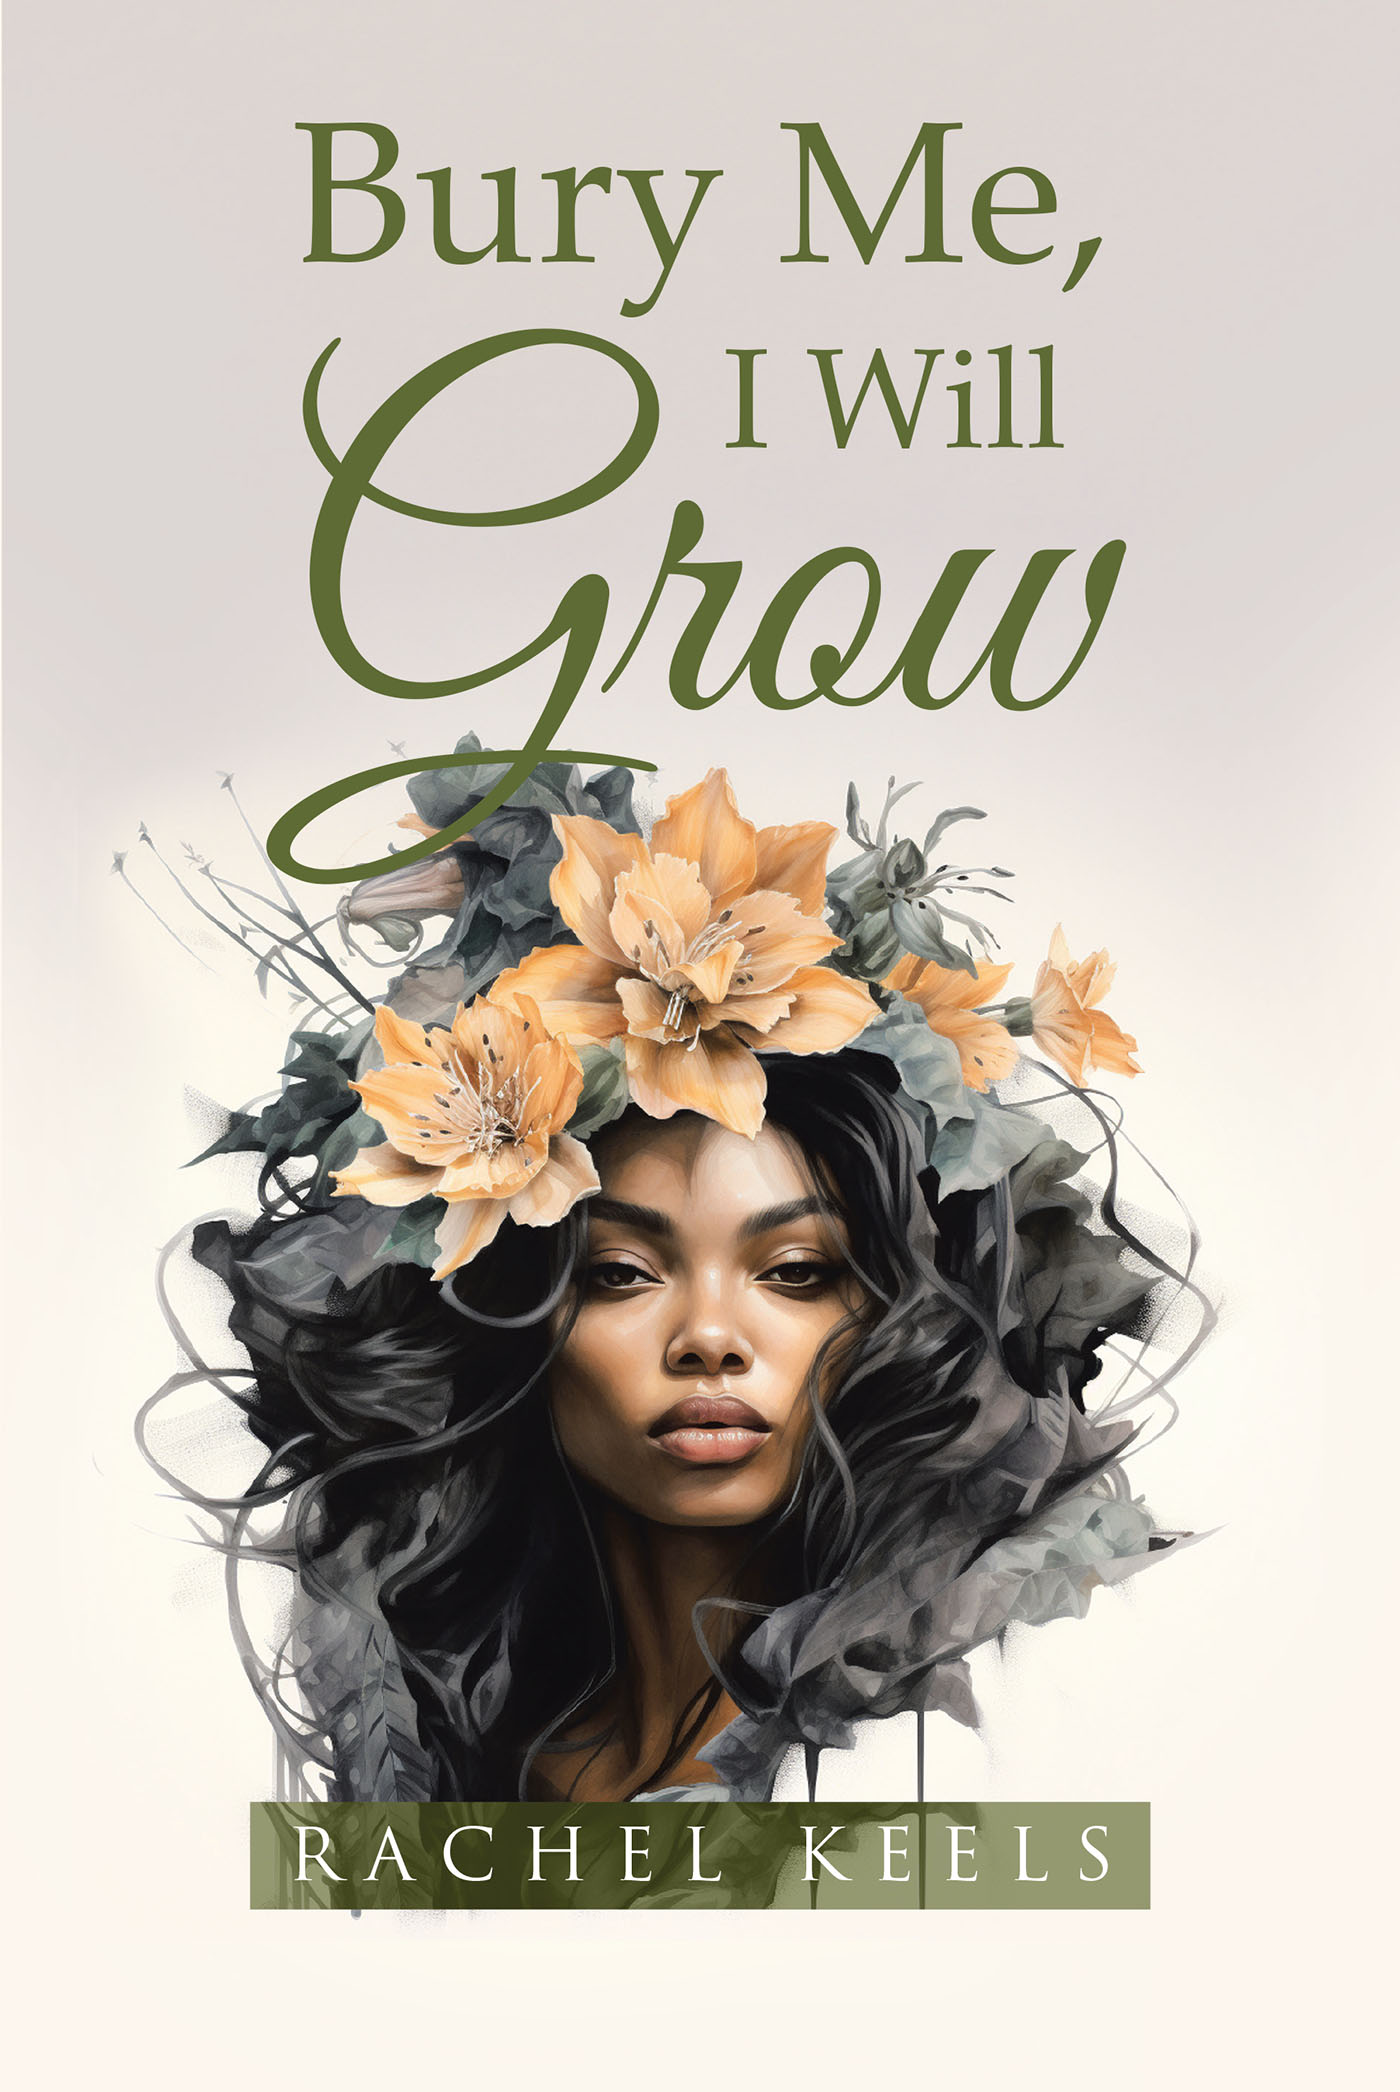 Author Rachel Marie Keels’s New Book, “Bury Me, I Will Grow,” is a Fascinating Read Exploring the Impact That Embracing Life’s Trials and Lessons Can Have on Oneself